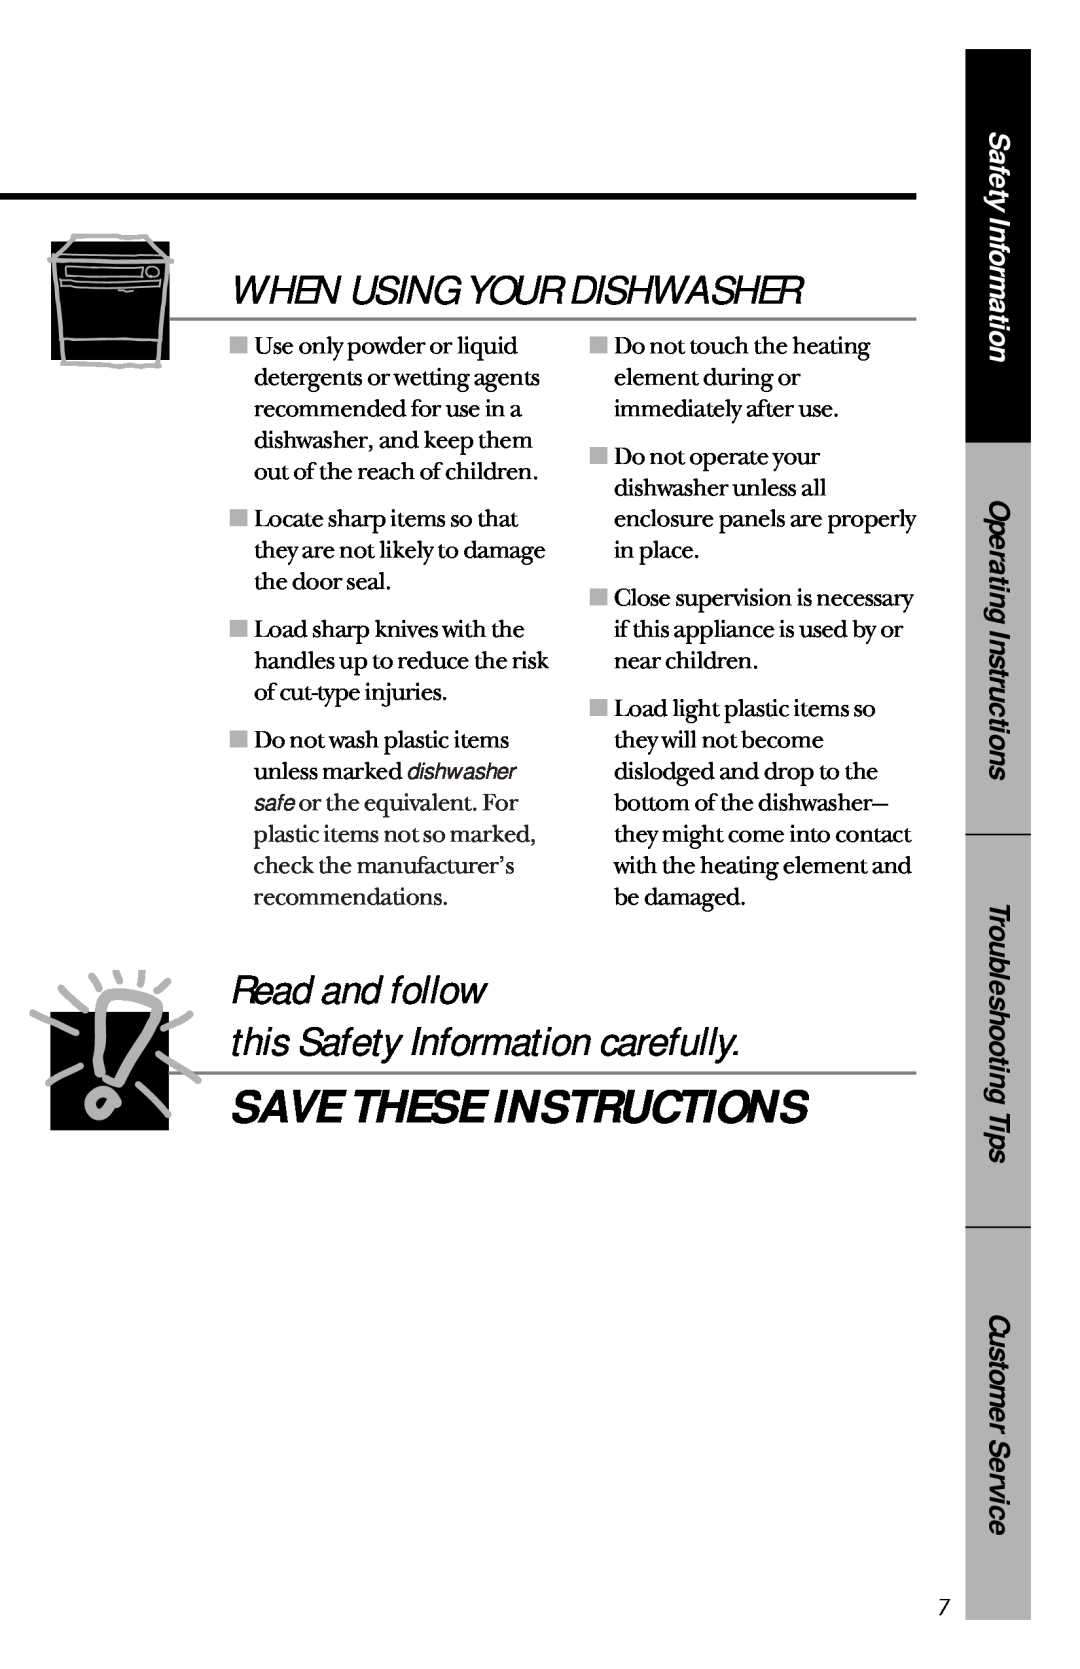 Hotpoint HDA2020 Read and follow this Safety Information carefully, When Using Your Dishwasher, Operating Instructions 